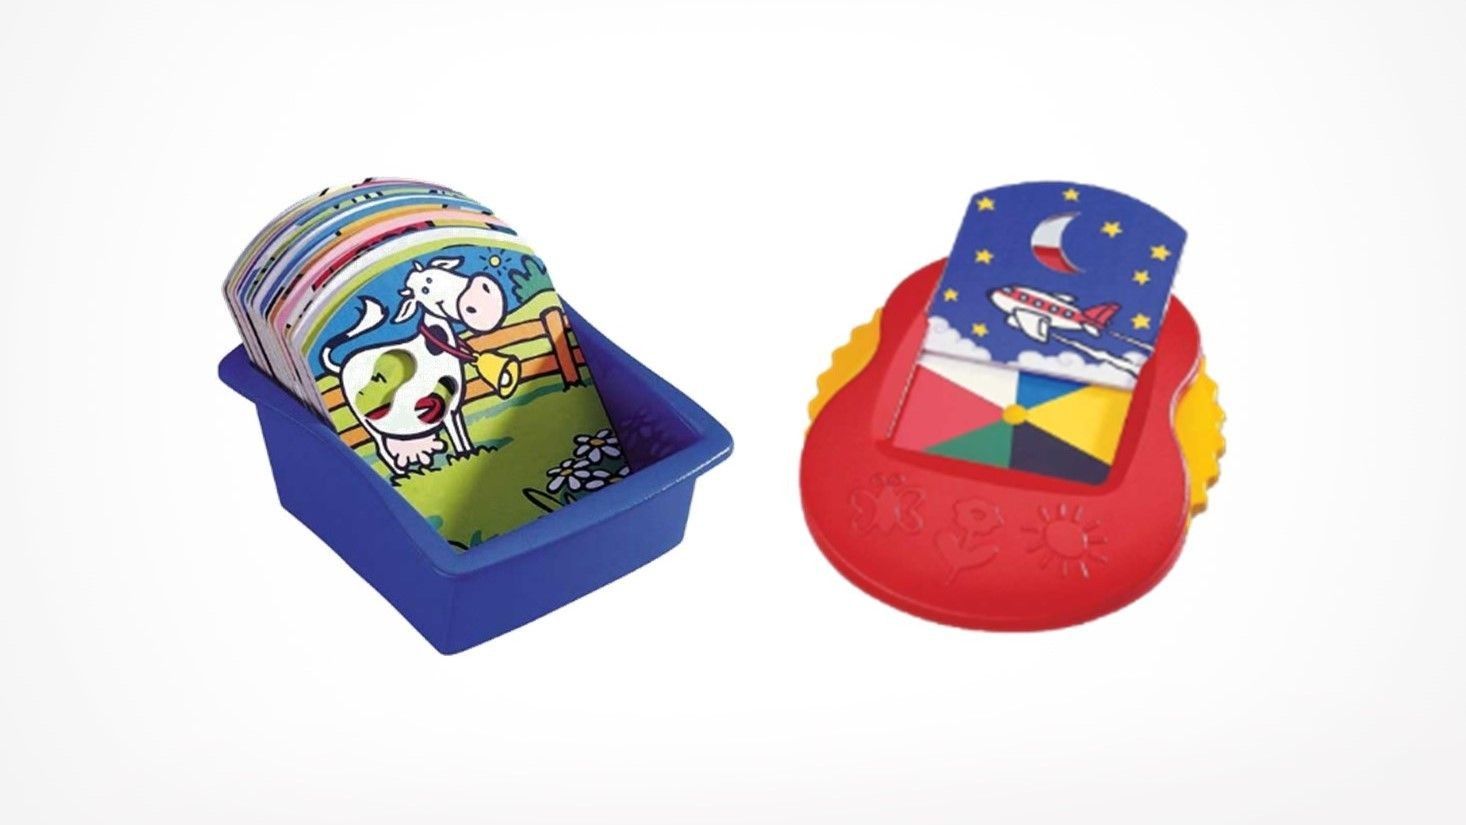 Children's game with colorful cards and turntable with colors